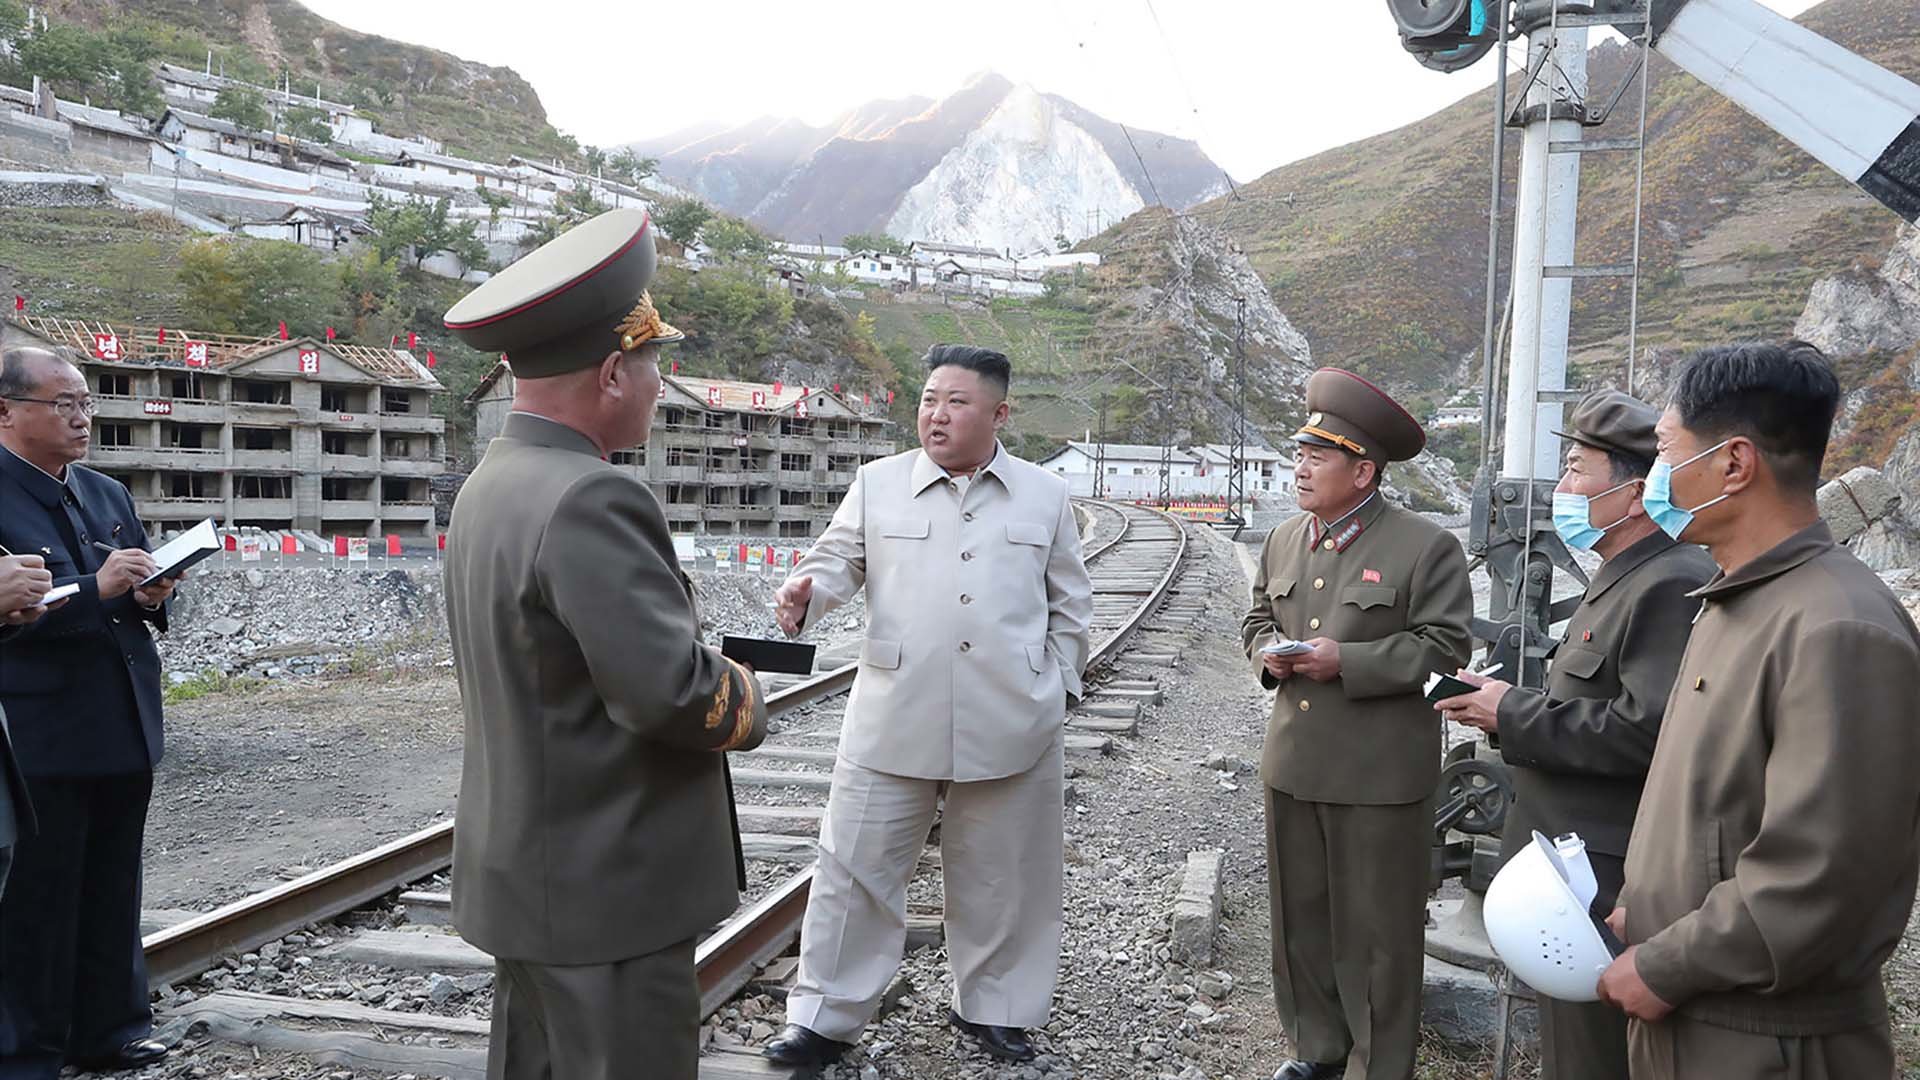 This undated picture released from North Korea's official Korean Central News Agency in 2020 shows North Korean leader Kim Jong Un (center) inspecting the rehabilitation site in the Komdok area of South Hamgyong Province. Korean Central News Agency photo via Getty Images.